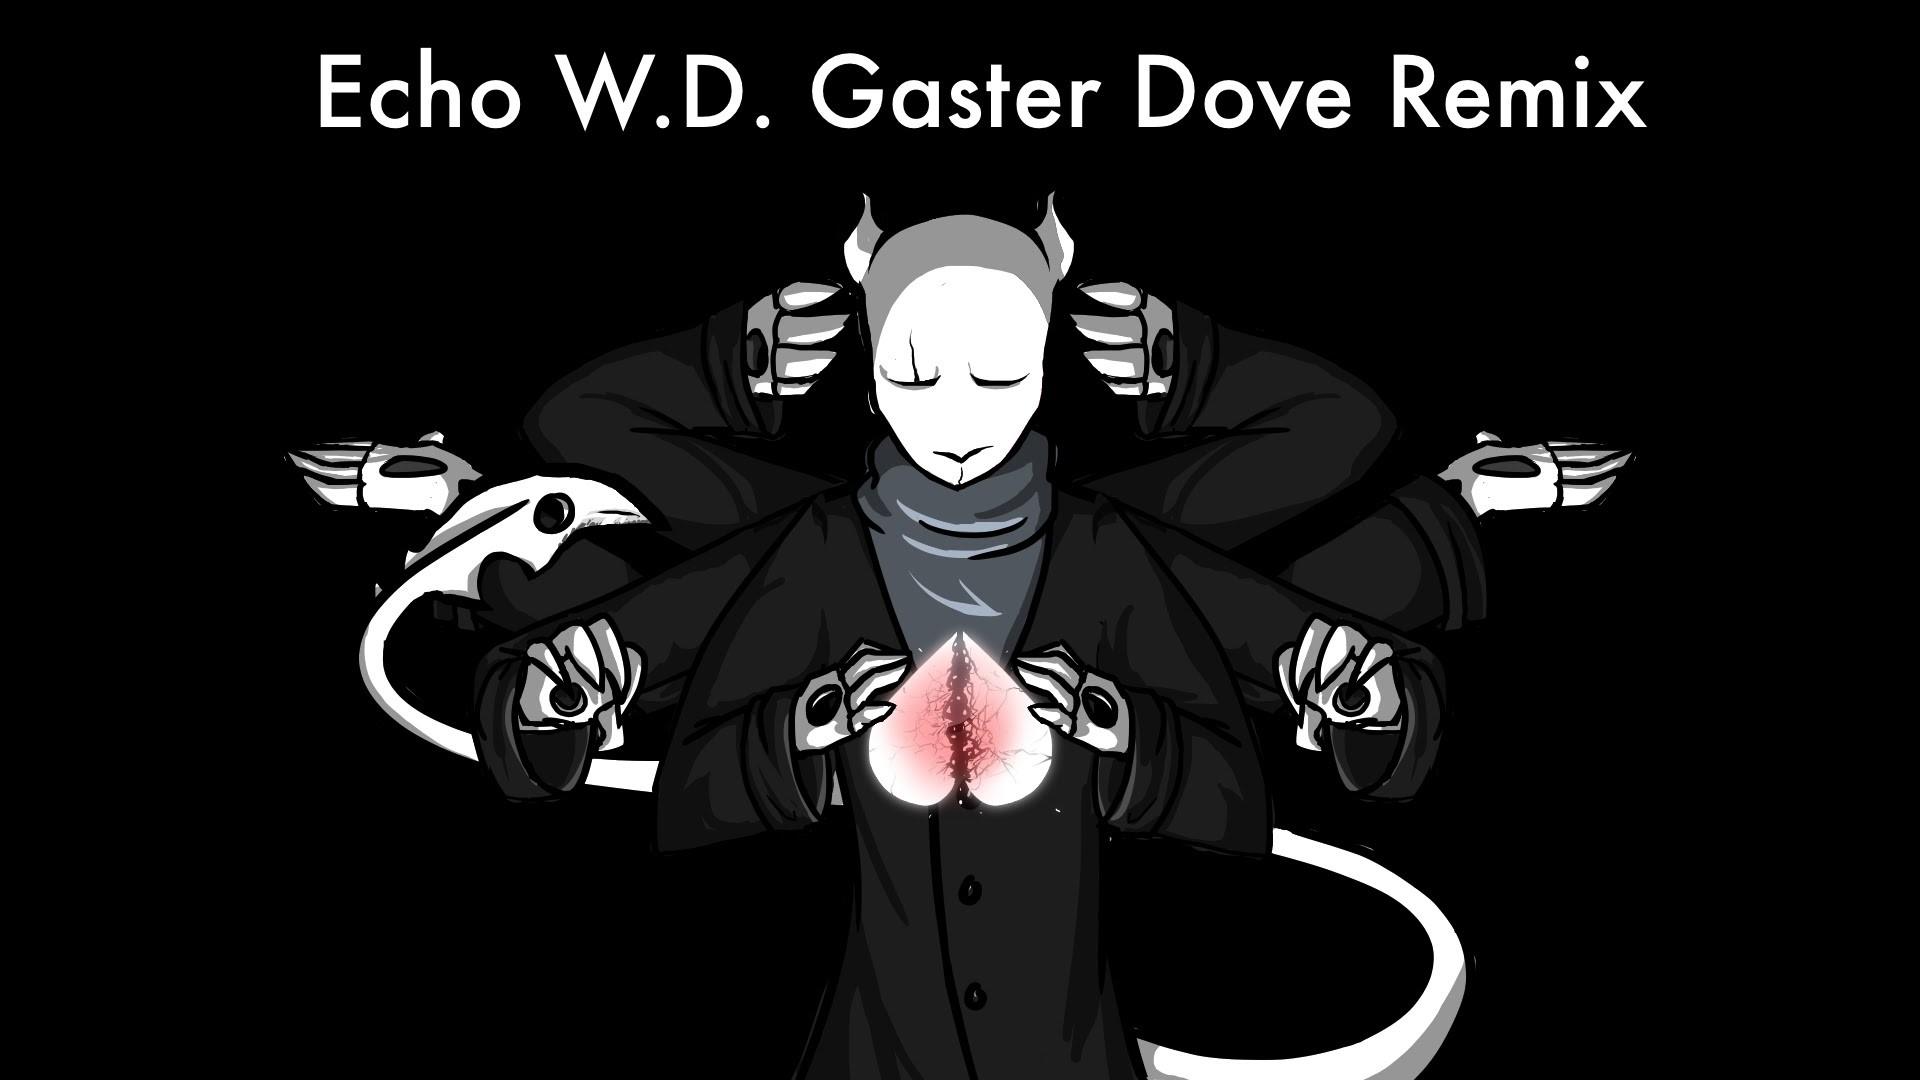 Wd Gaster Wallpaper, image collections of wallpaper